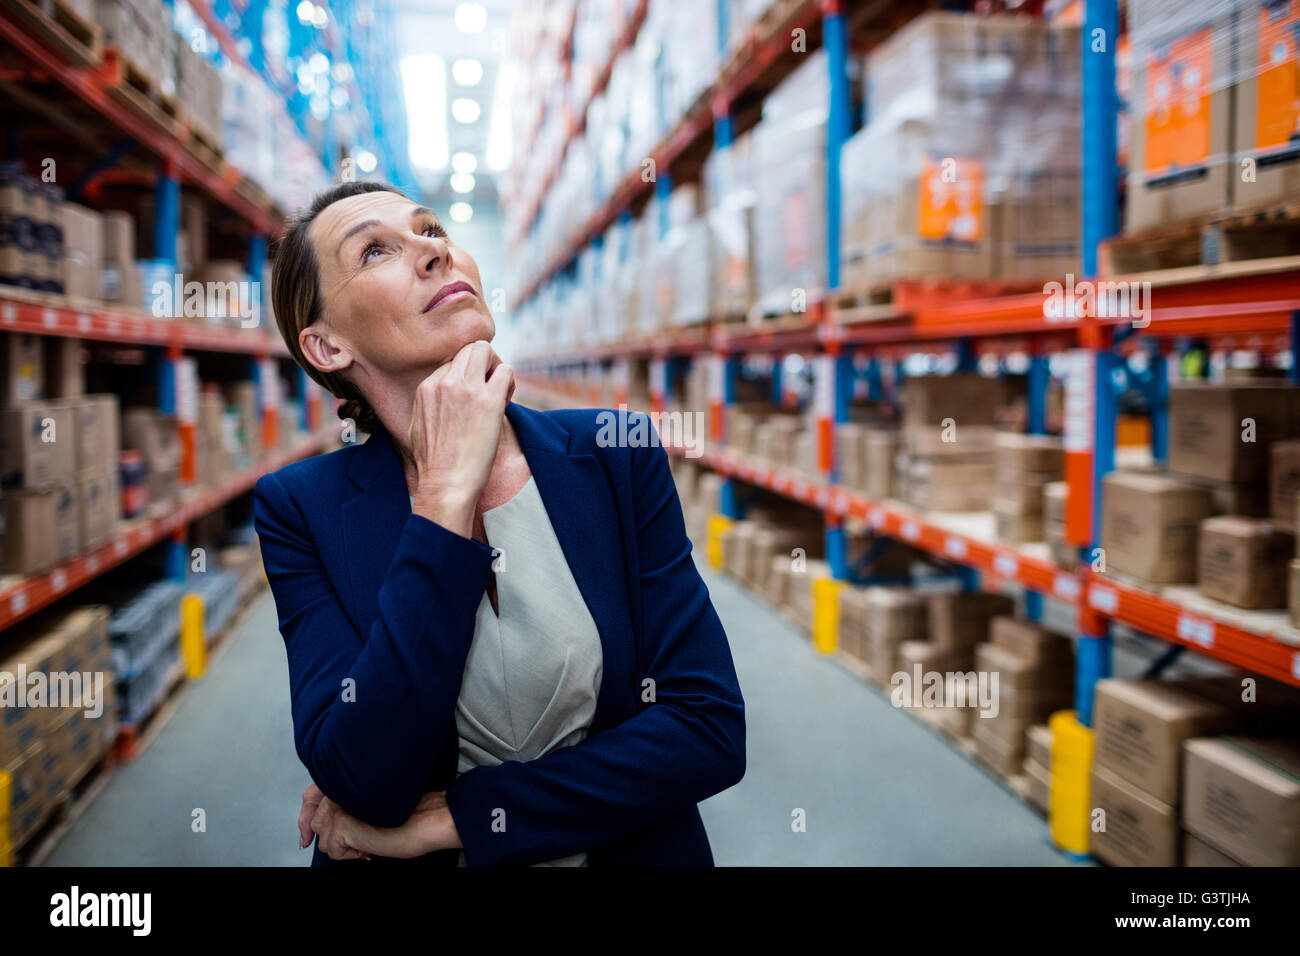 Warehouse manager looking up Stock Photo